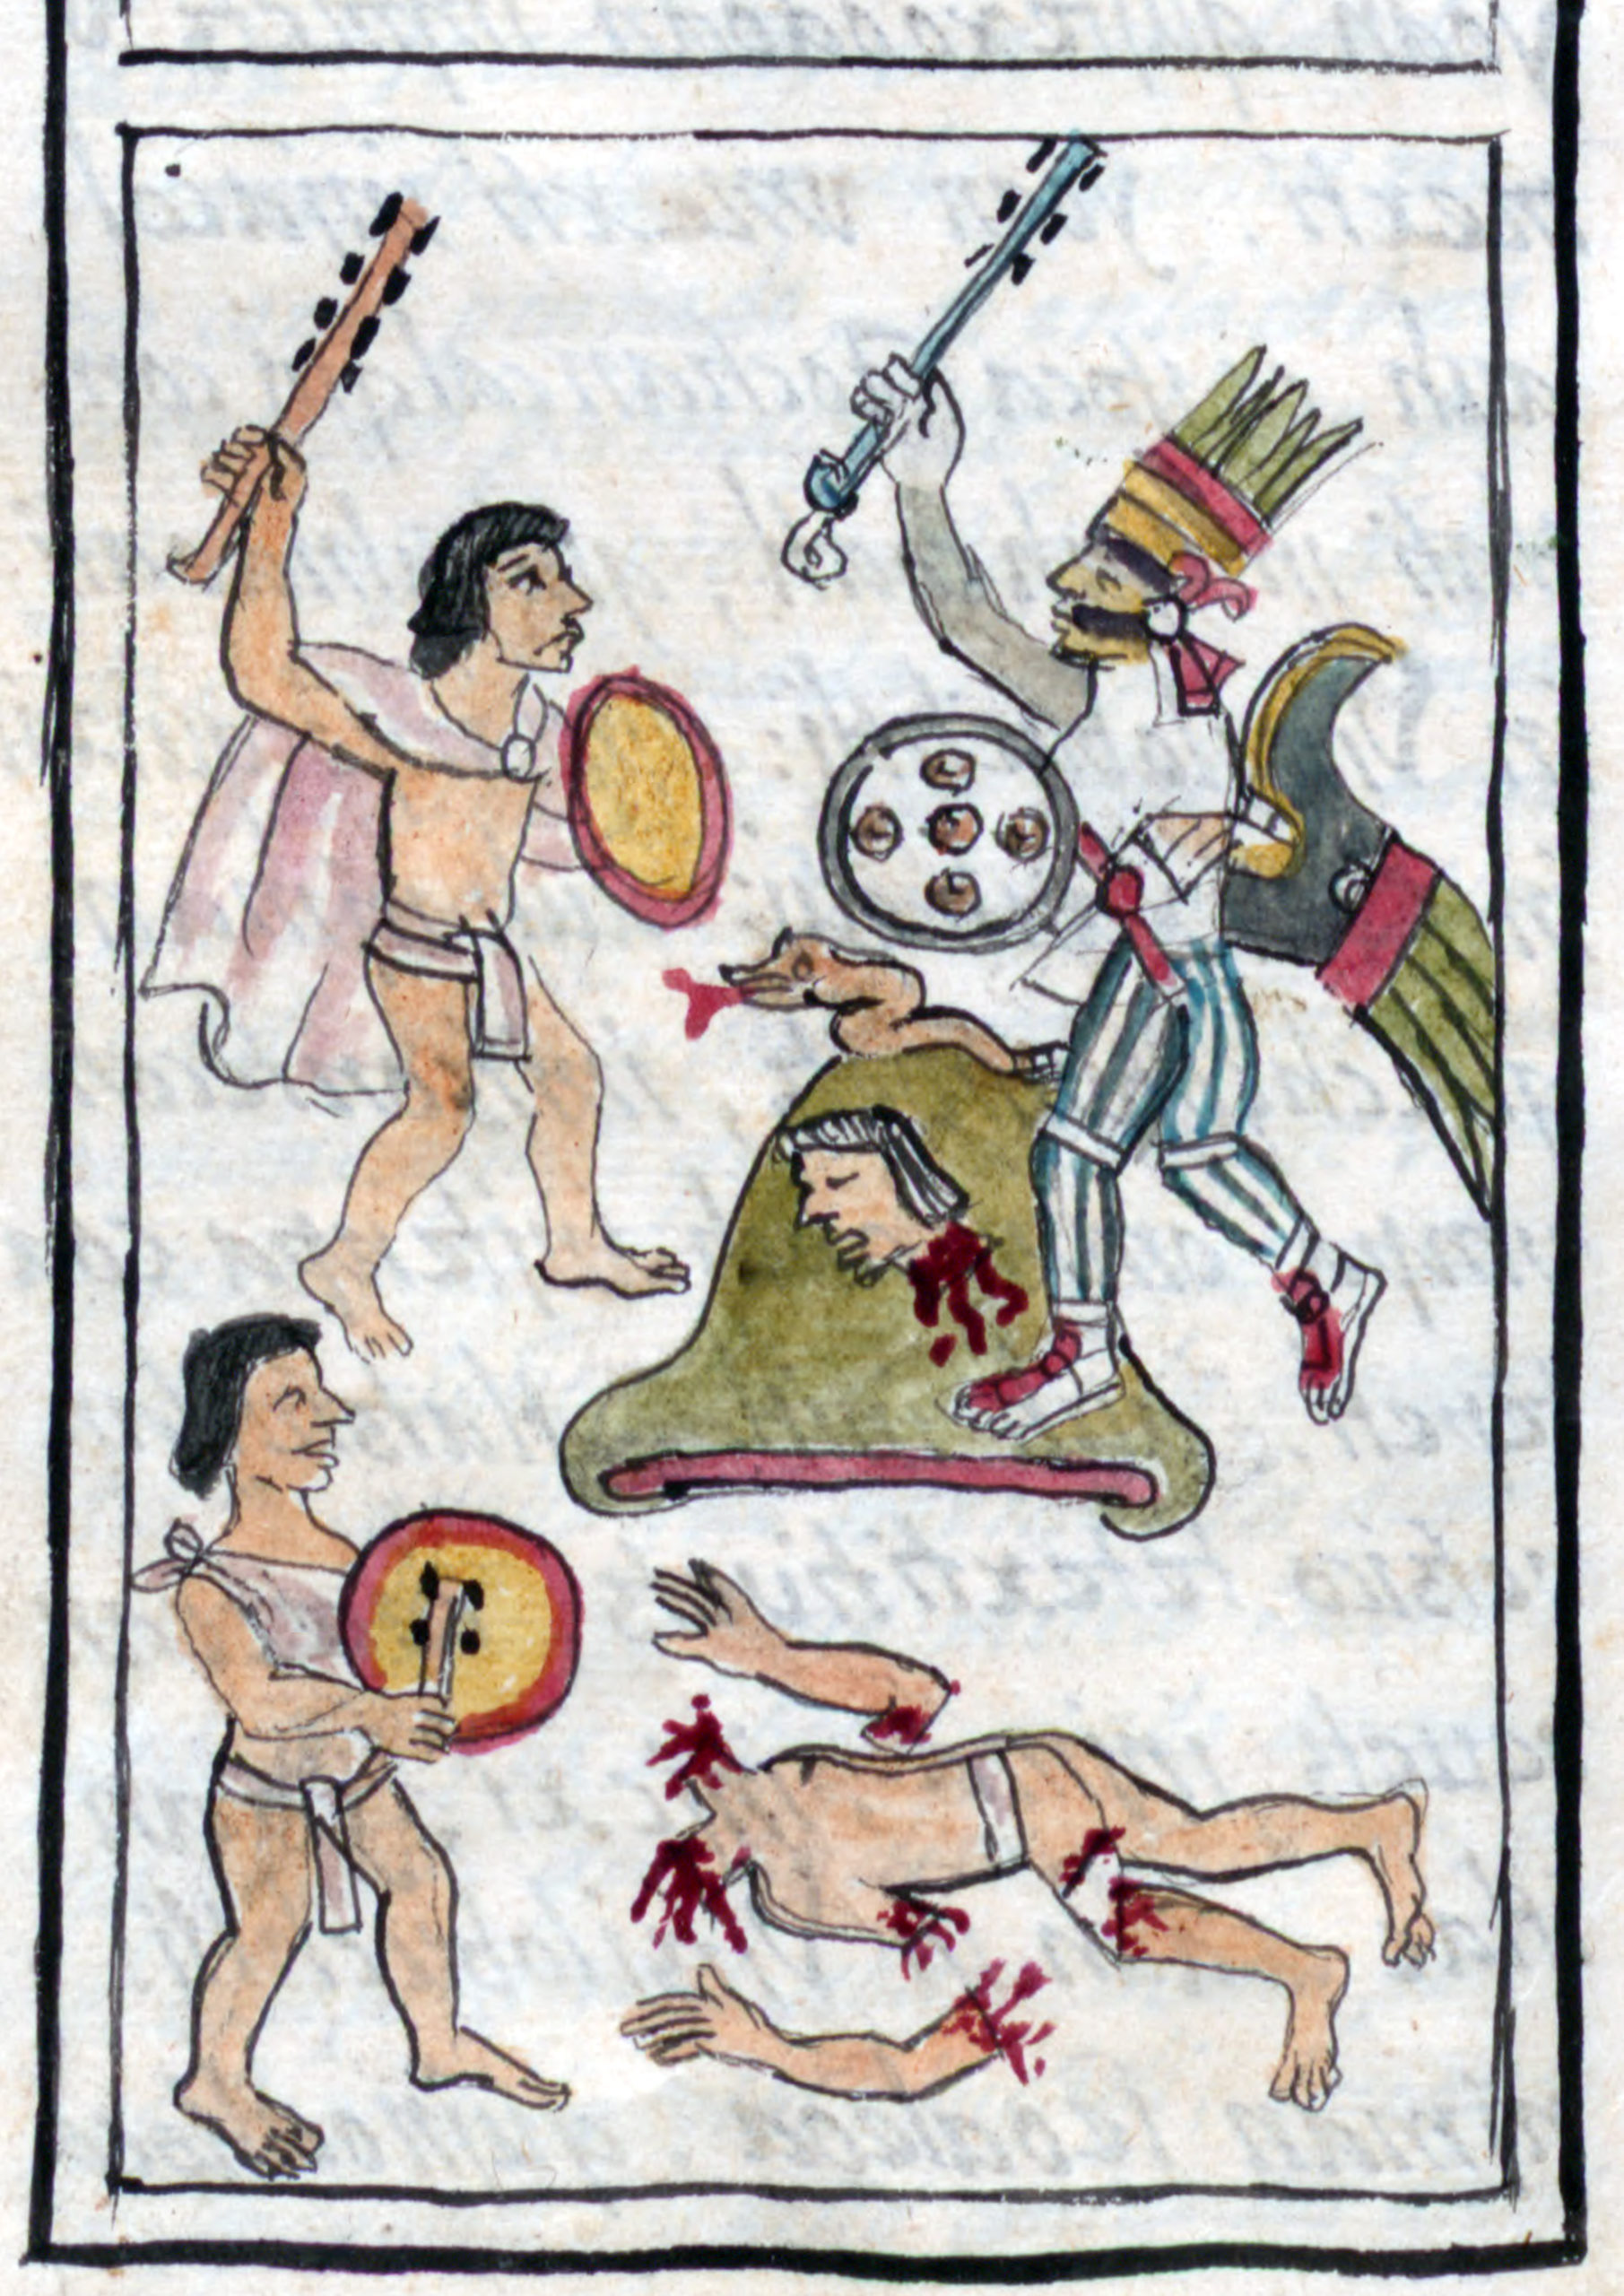 Illustration of the Battle of Coatepec from Bernardino de Sahagún, General History of the Things of New Spain (The Florentine Codex), 1575–77, volume 1, page 420 (Library of Congress, World Digital Library)